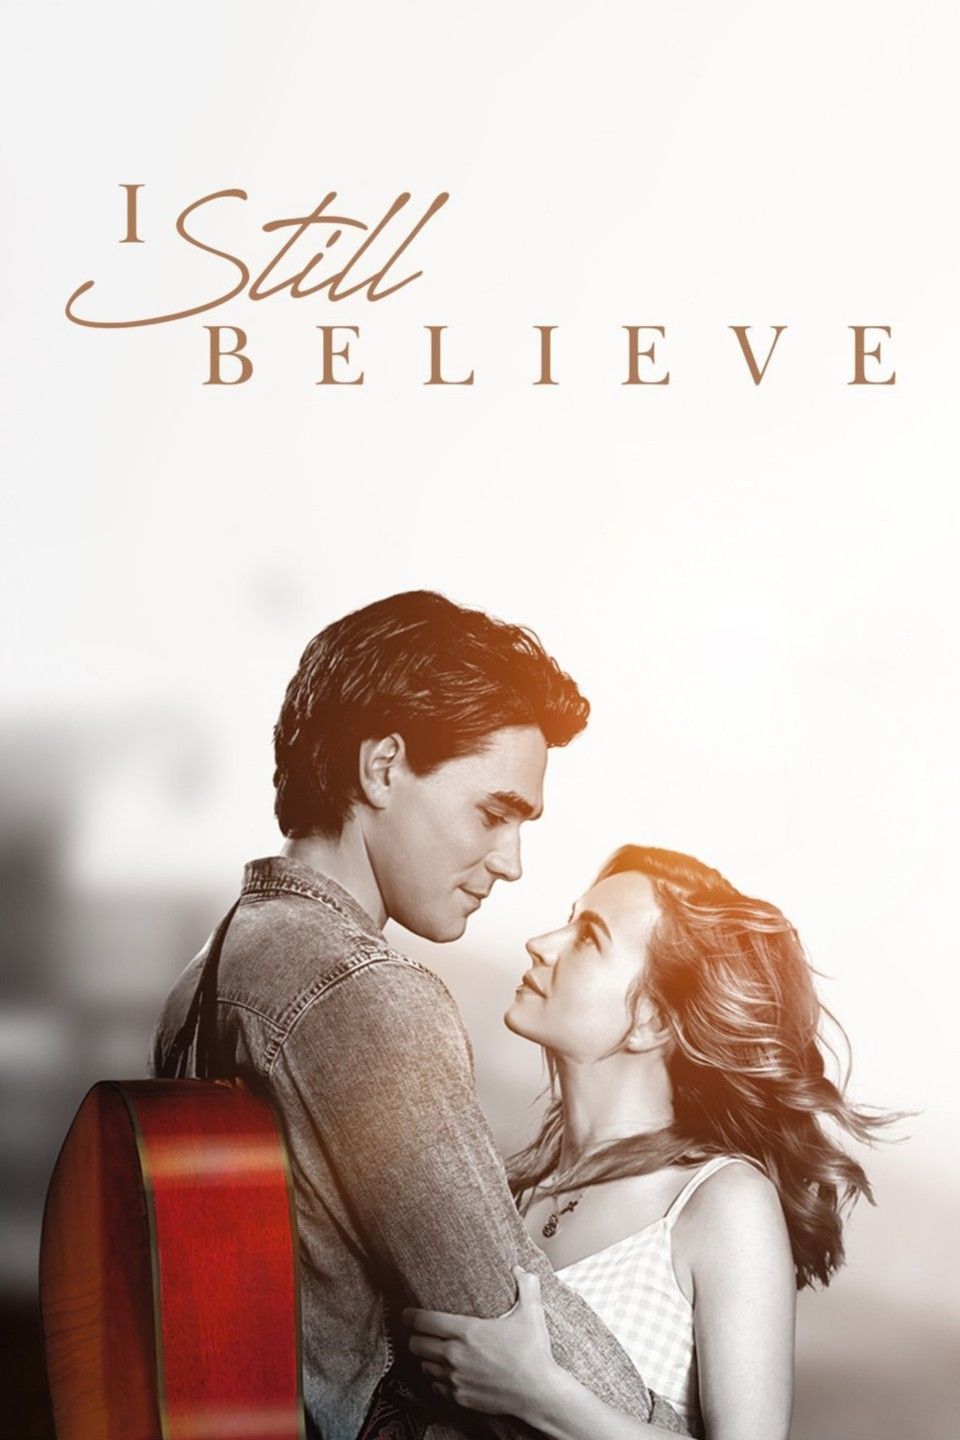 I Still Believe now playing in theaters & will be available